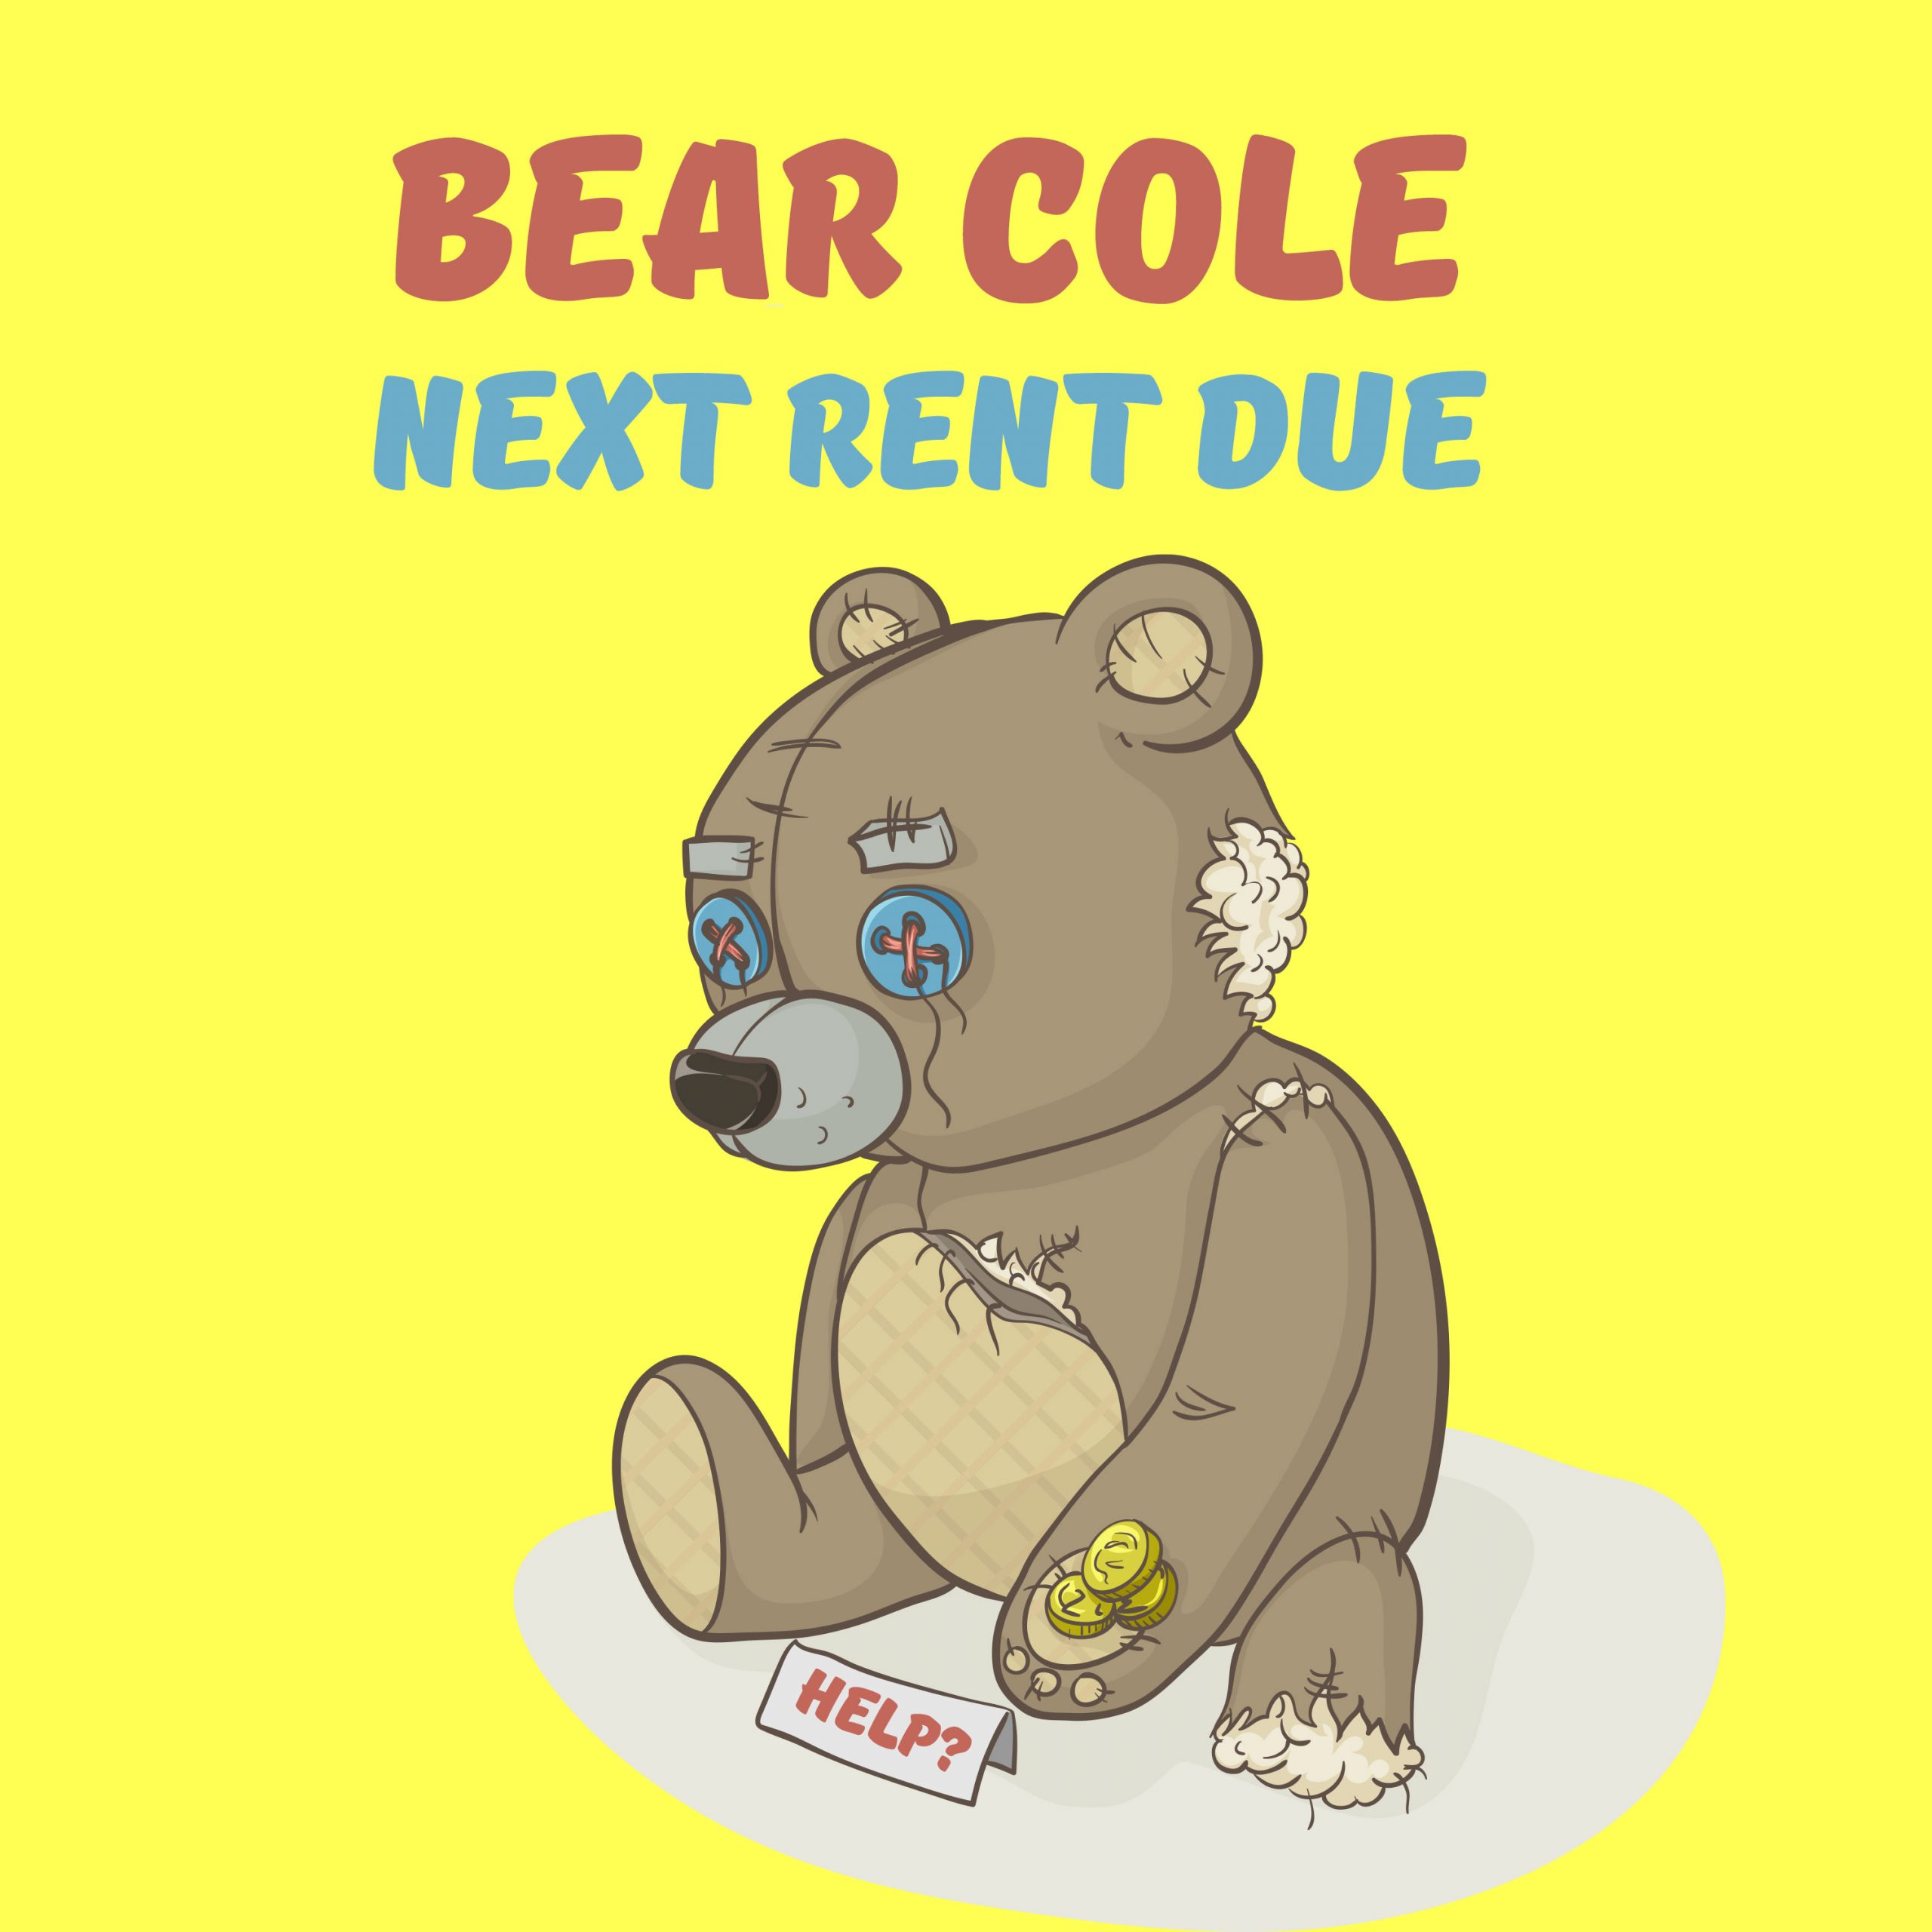 Next Rent Due by Bear Cole